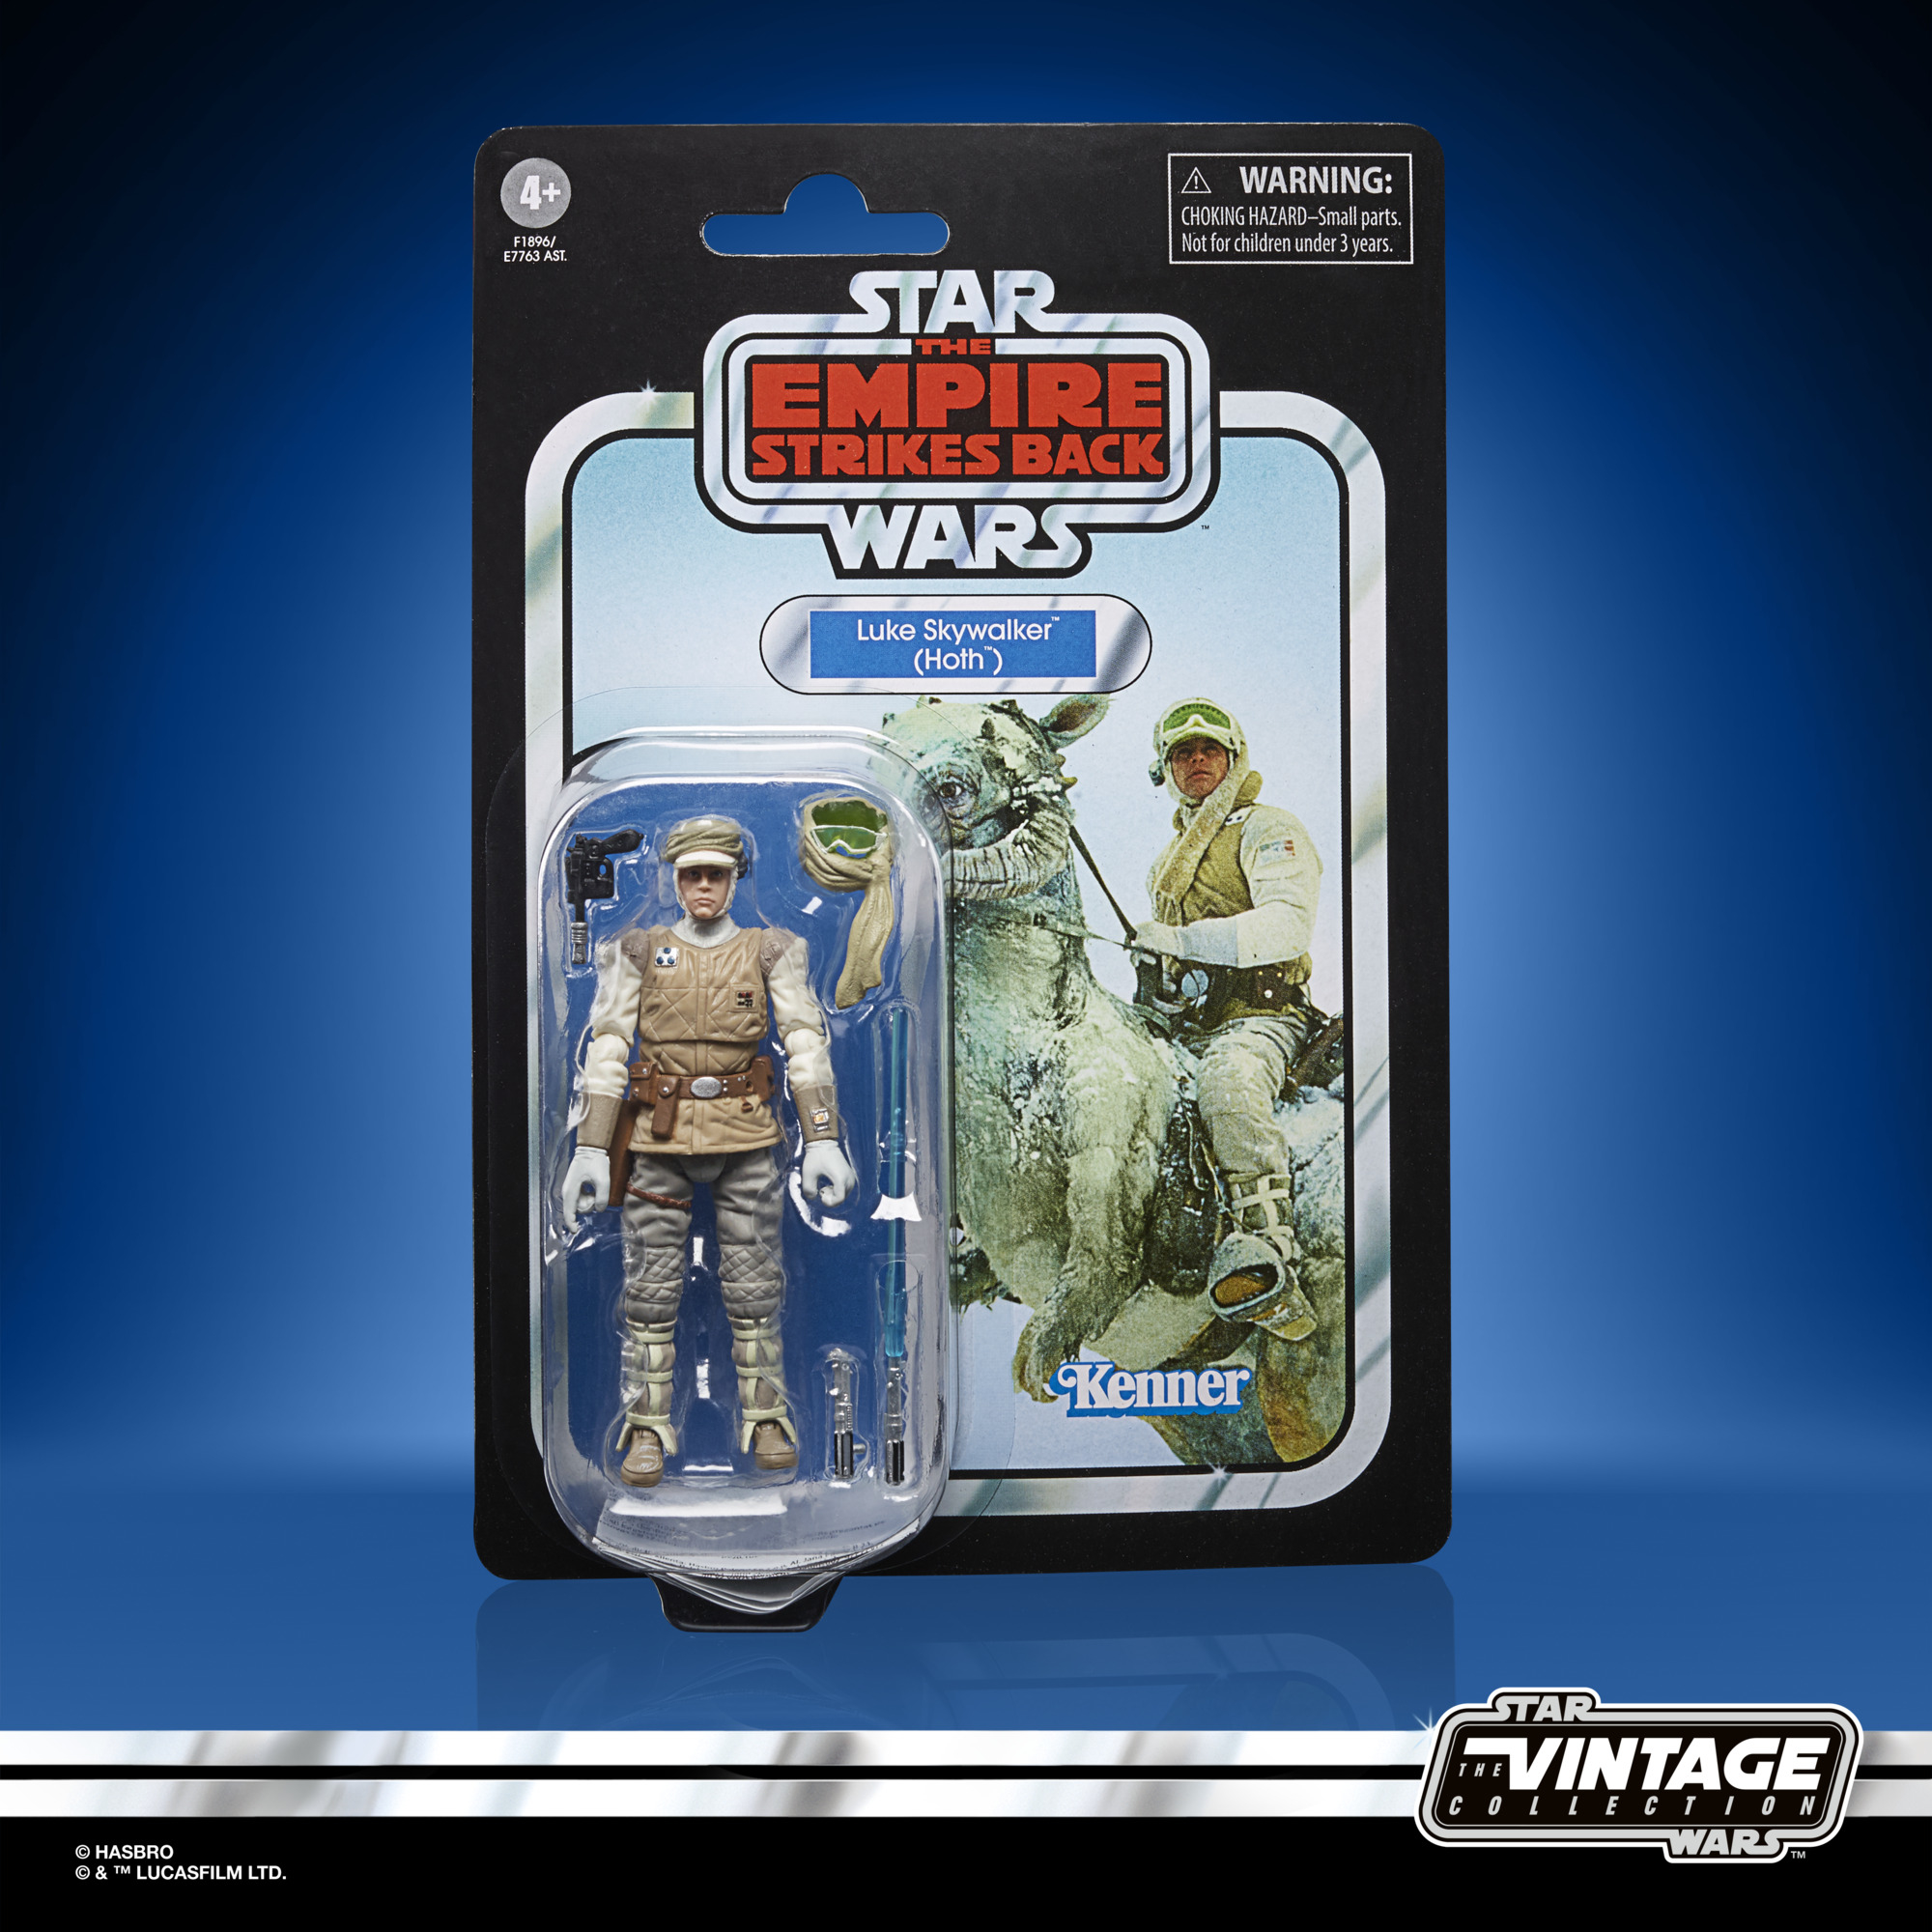 Star Wars - The Vintage Collection - The Empire Strikes Back - Luke Skywalker (Hoth) 3.75inch Action Figure